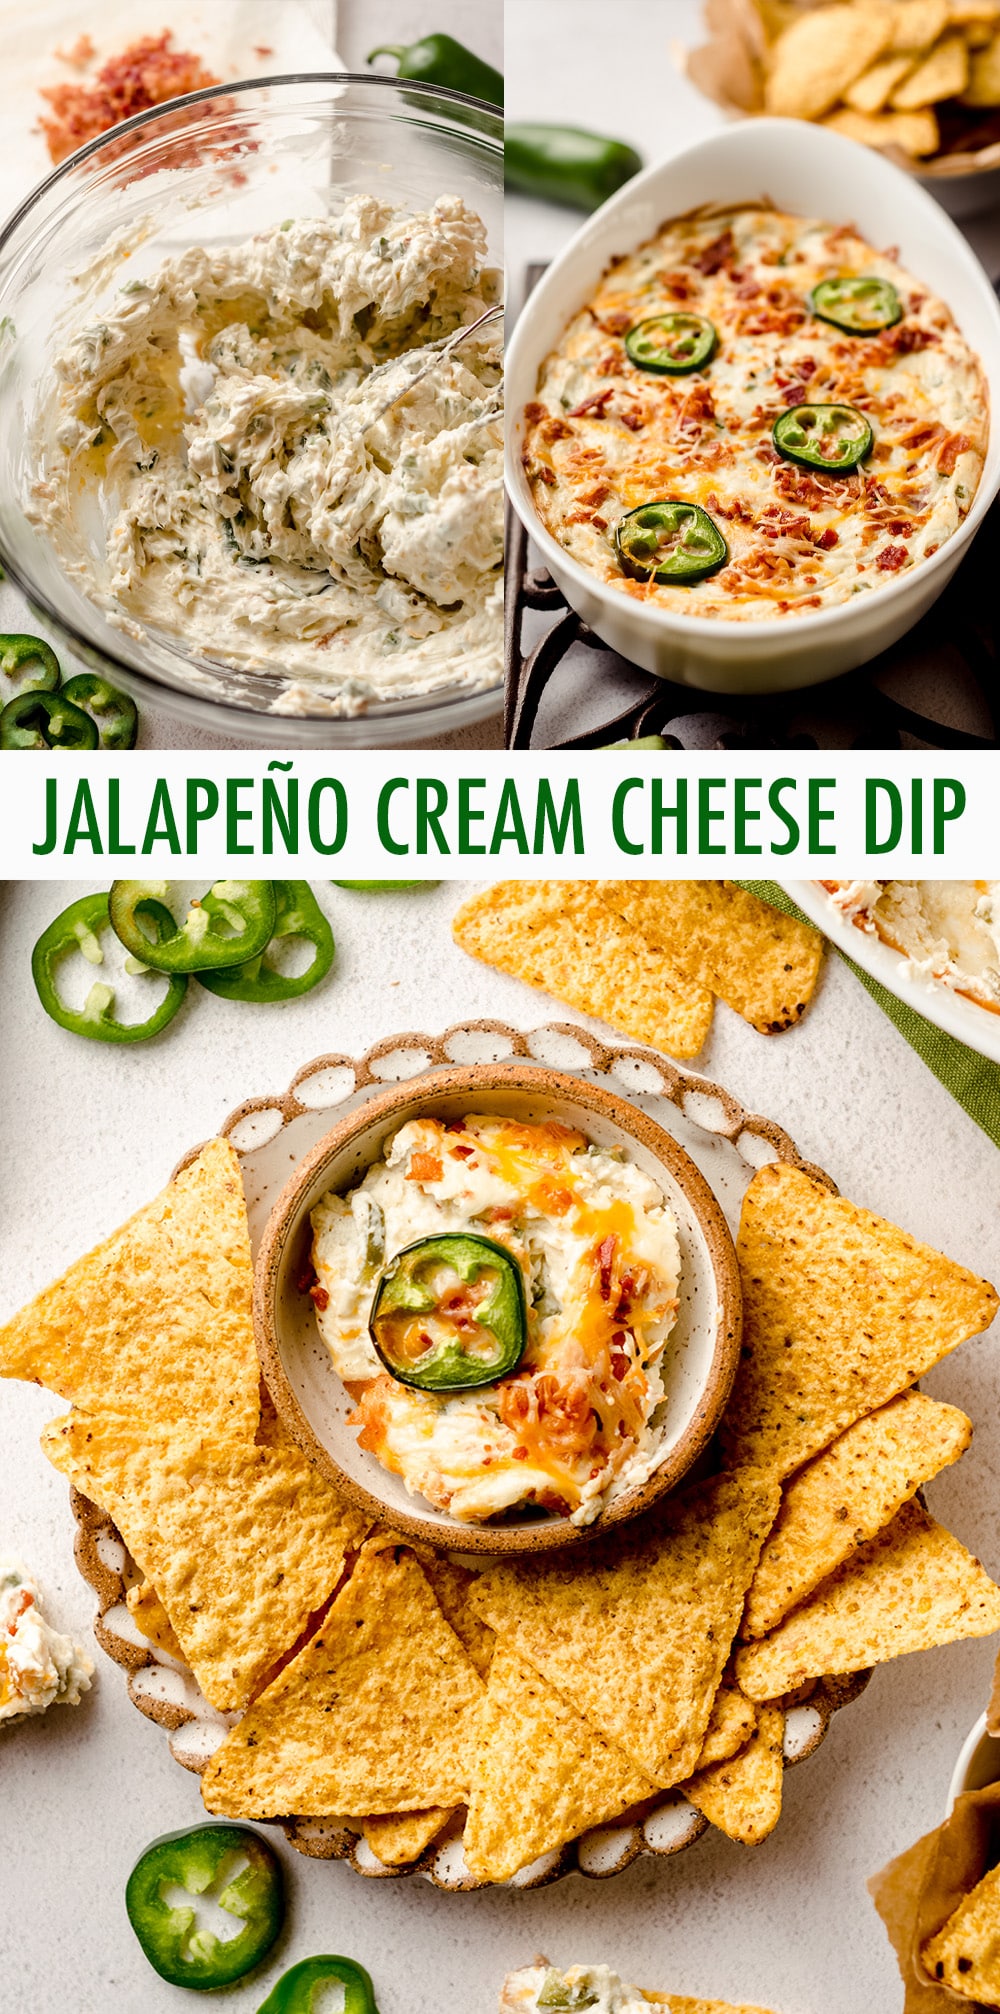 Cheesy, creamy, spicy jalapeño popper dip is the perfect appetizer or side for any Mexican dish. Serve with chips, vegetables, or as a topping. via @frshaprilflours